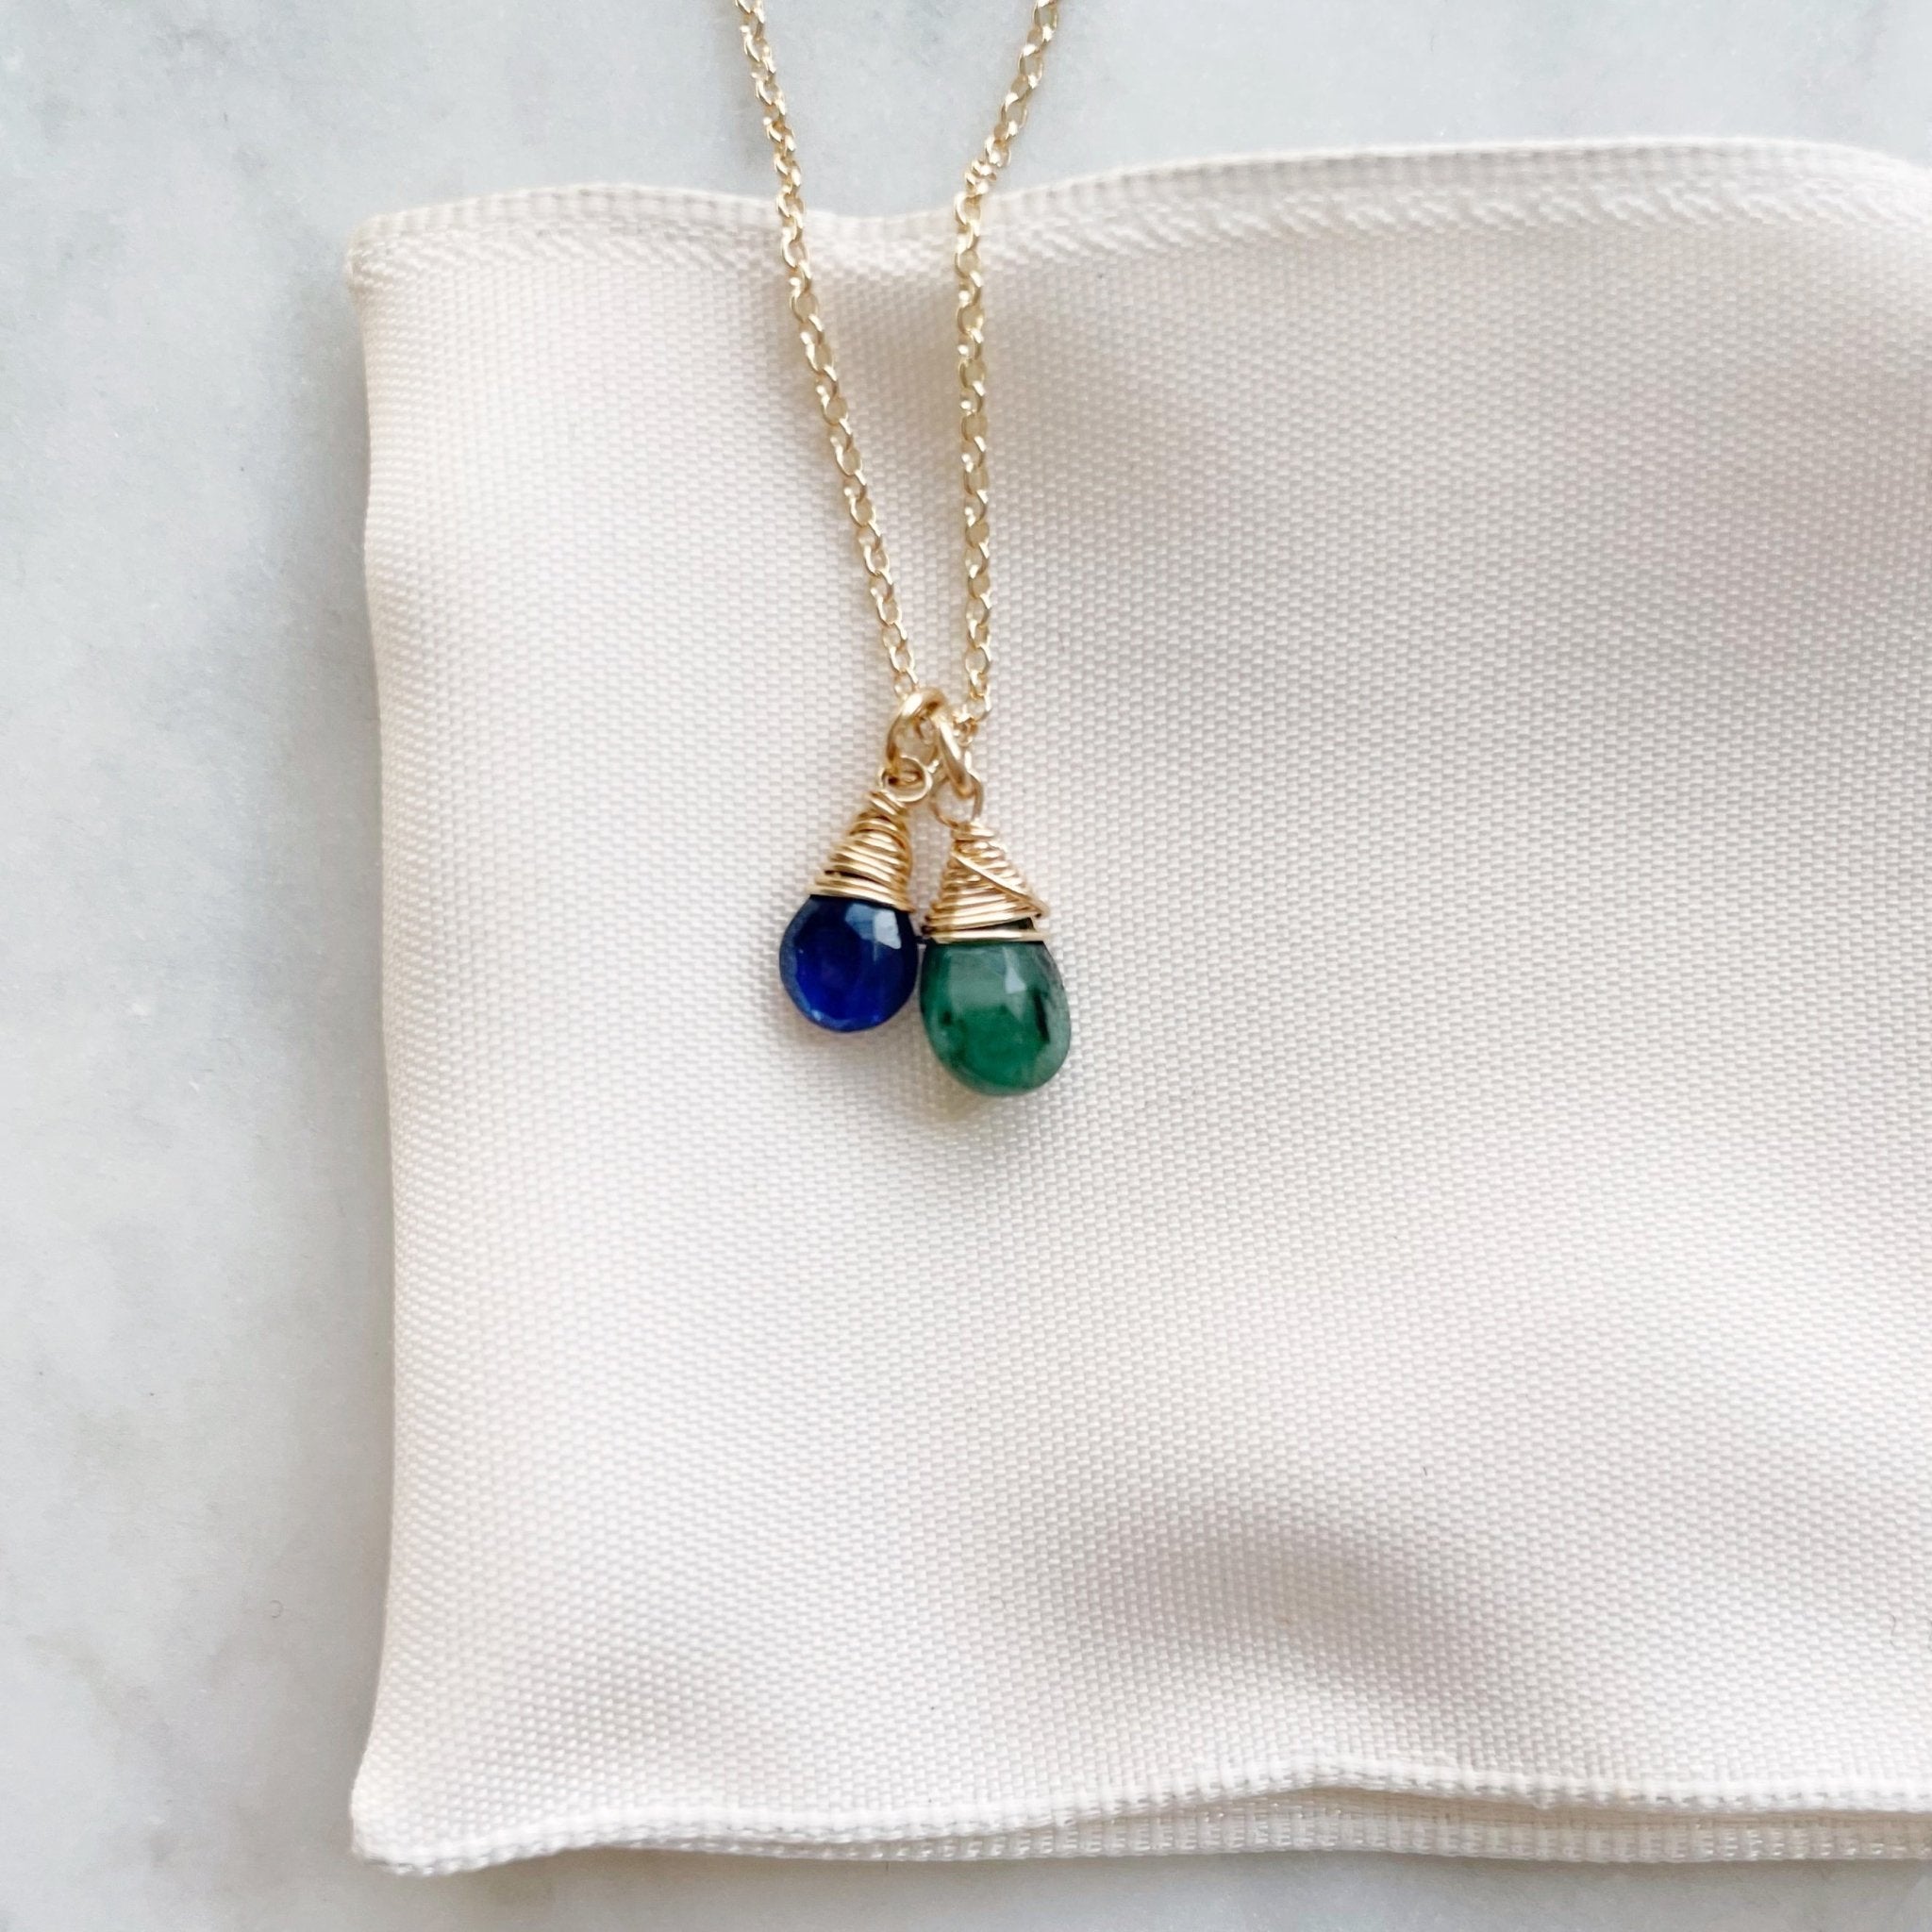 Gold wire wrapped gemstone birthstone necklace with blue and green gemstone pendants. Heritage Necklace by Sarah Cornwell Jewelry